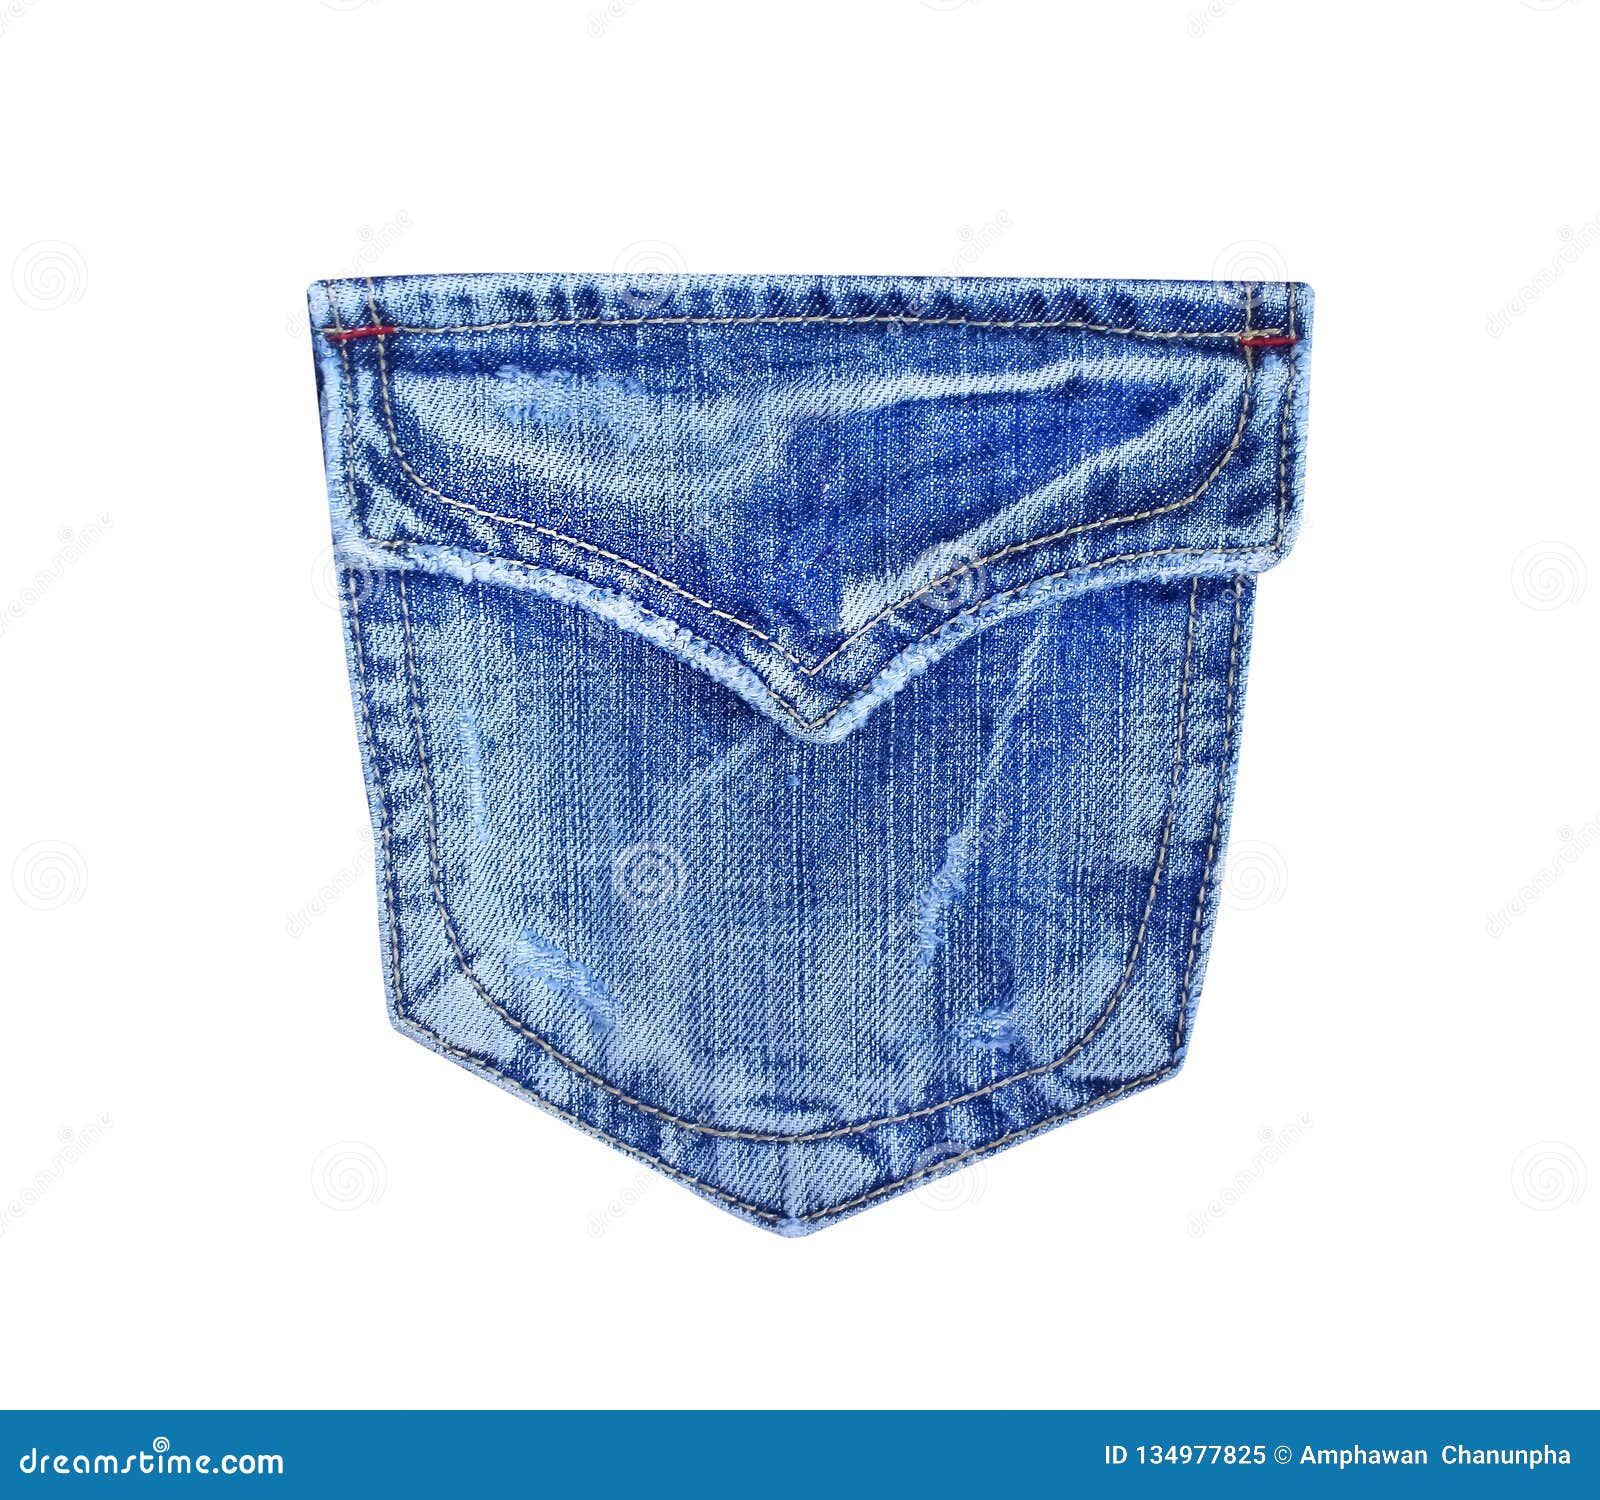 Back Blue Jeans Pocket Texture Isolated on White Background with ...